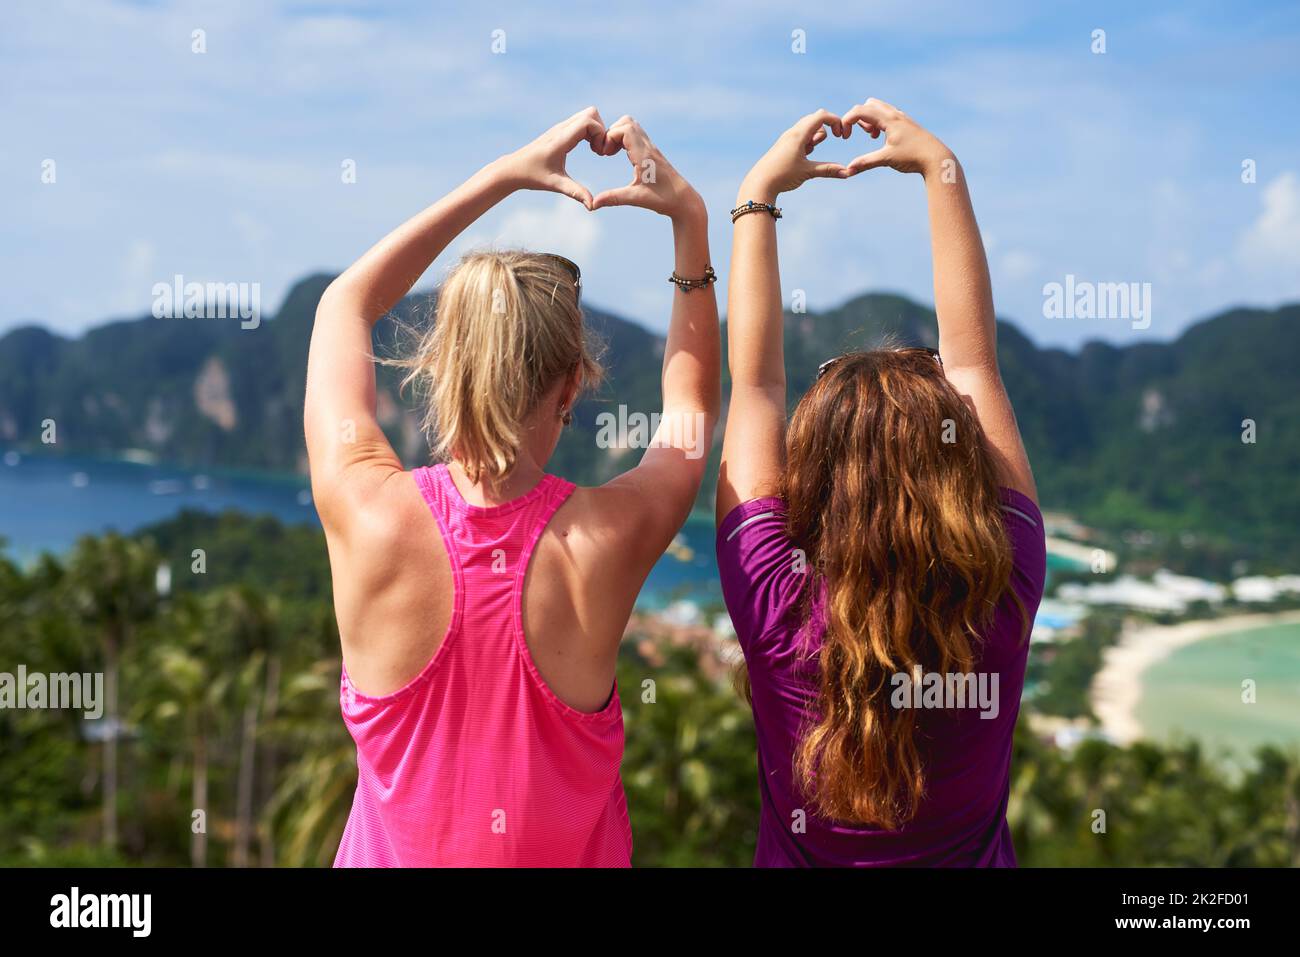 Live for the moments that make life beautiful. Rear view shot of two young woman making a heart gesture while facing a scenic landscape. Stock Photo